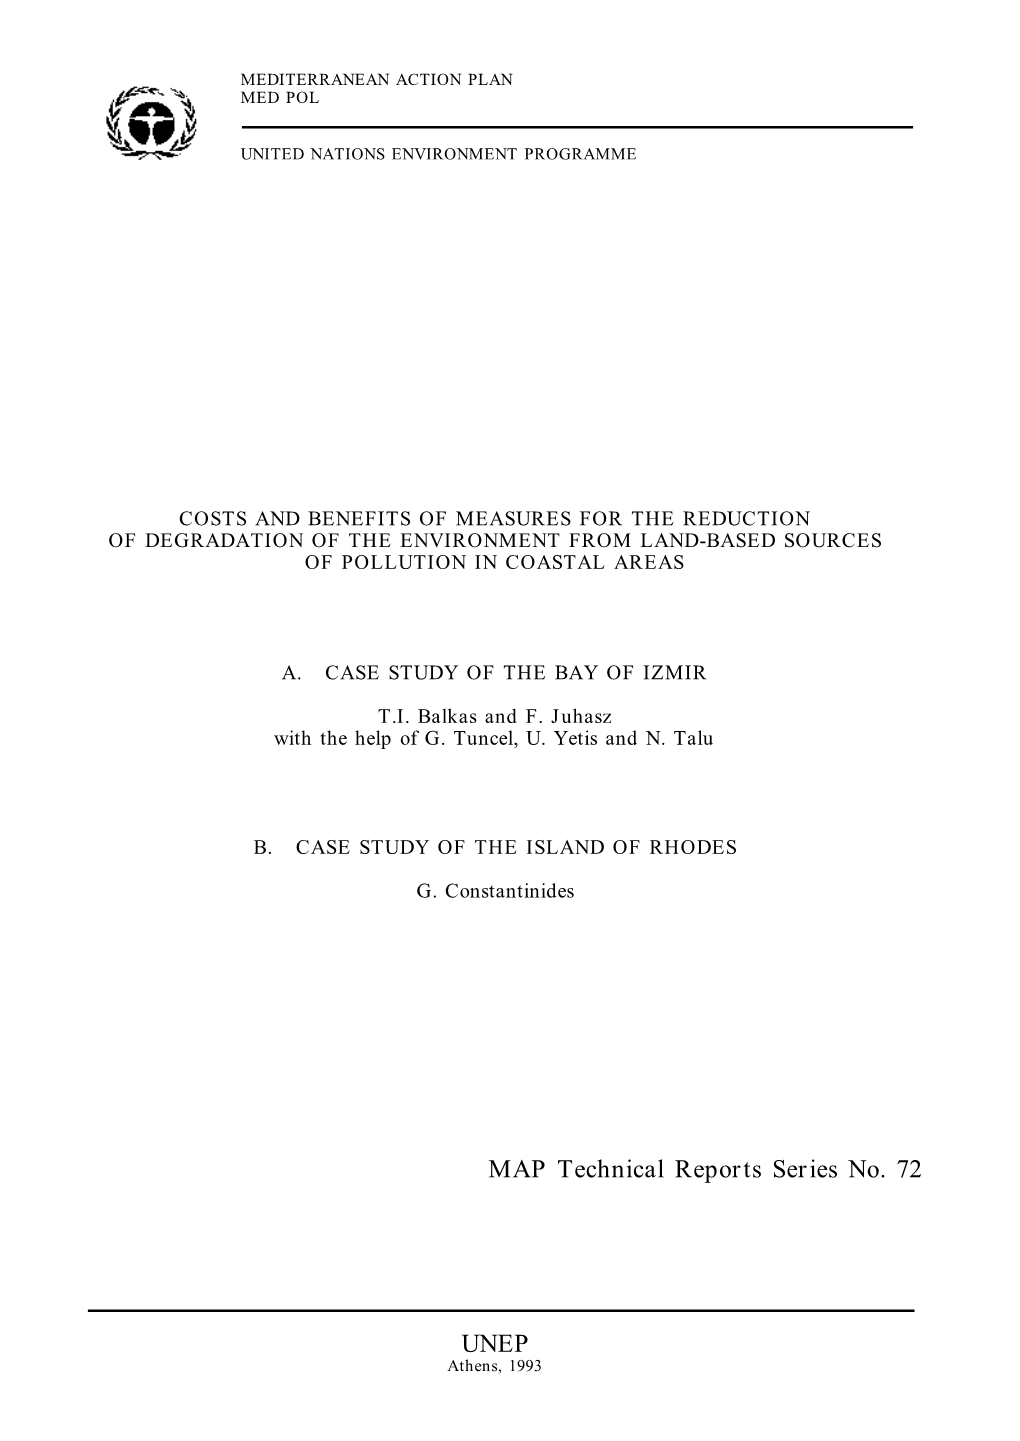 MAP Technical Reports Series No. 72 UNEP